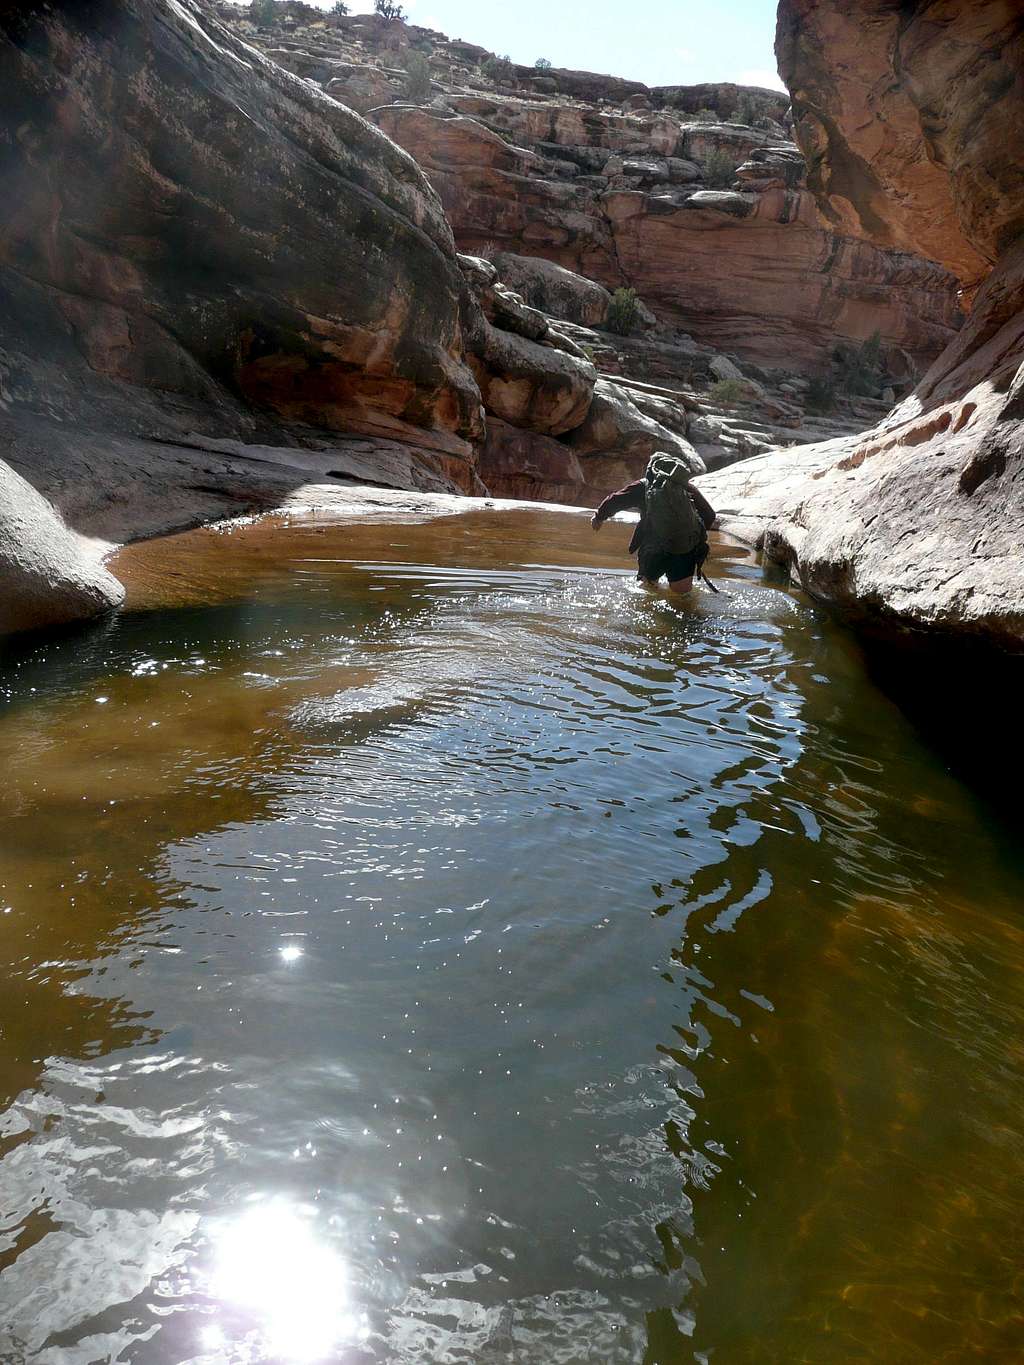 Wading the ice-cold water